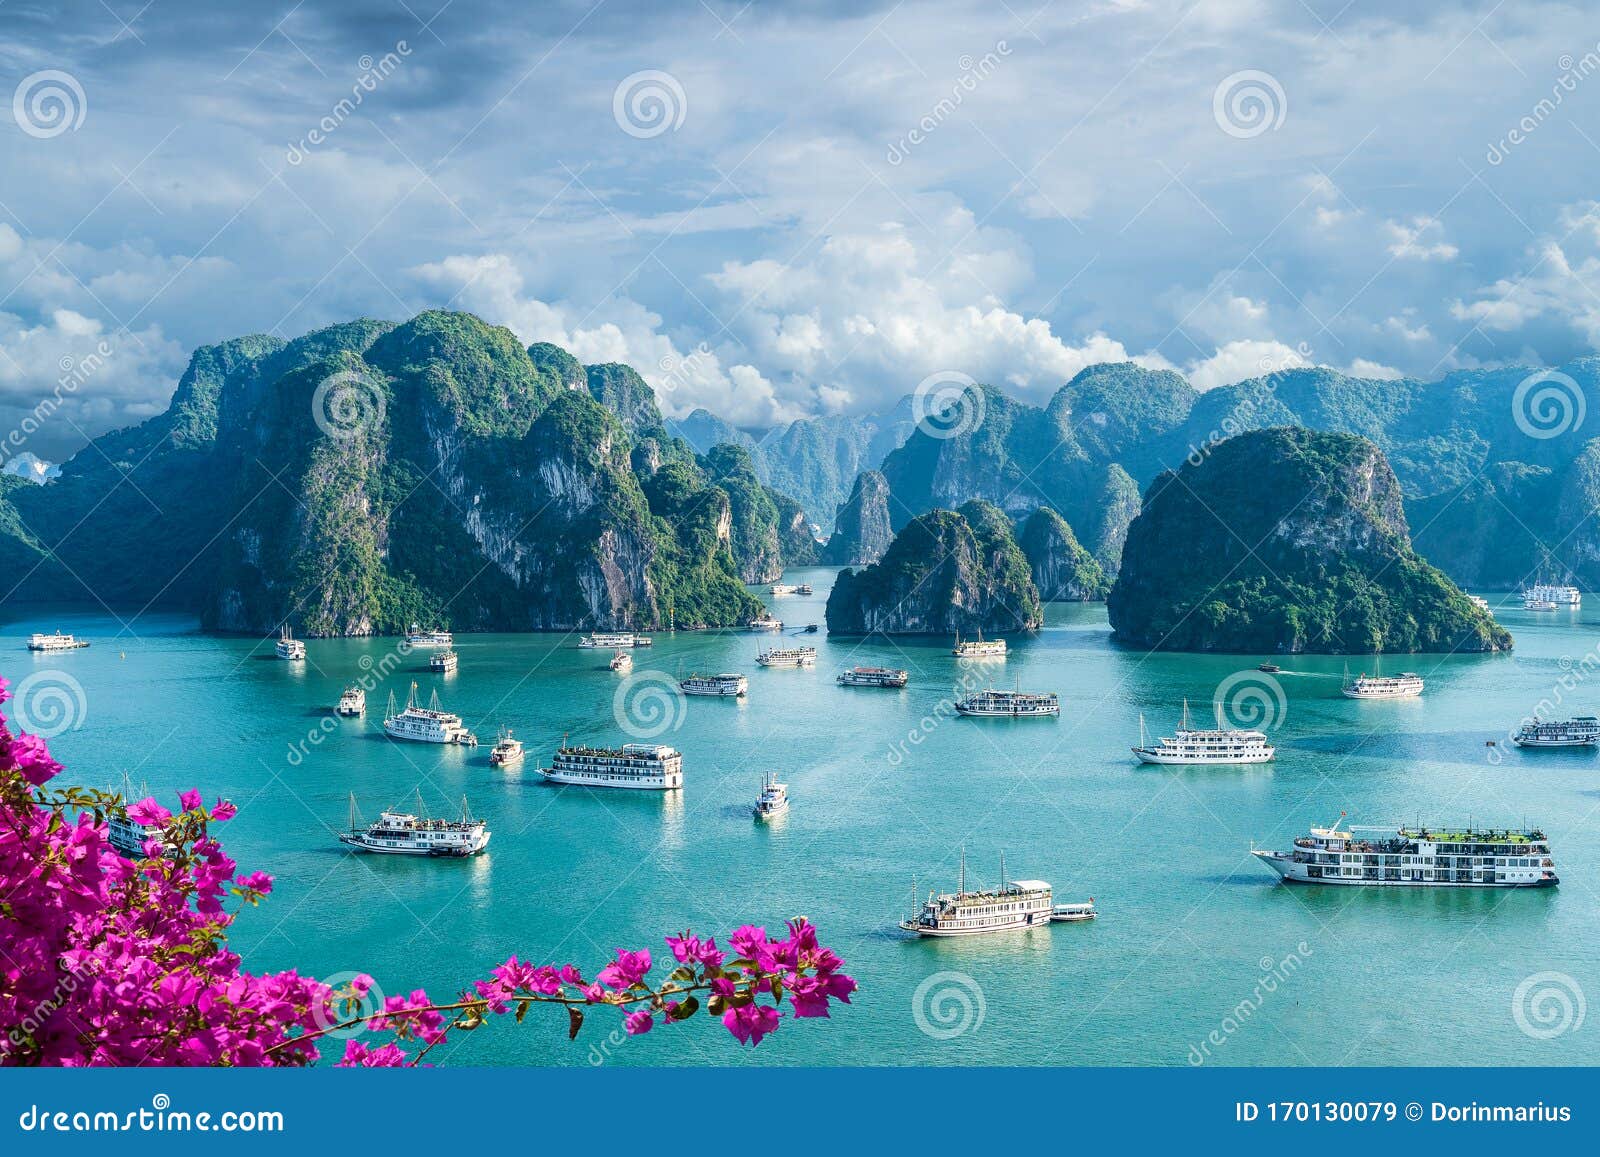 landscape with halong bay